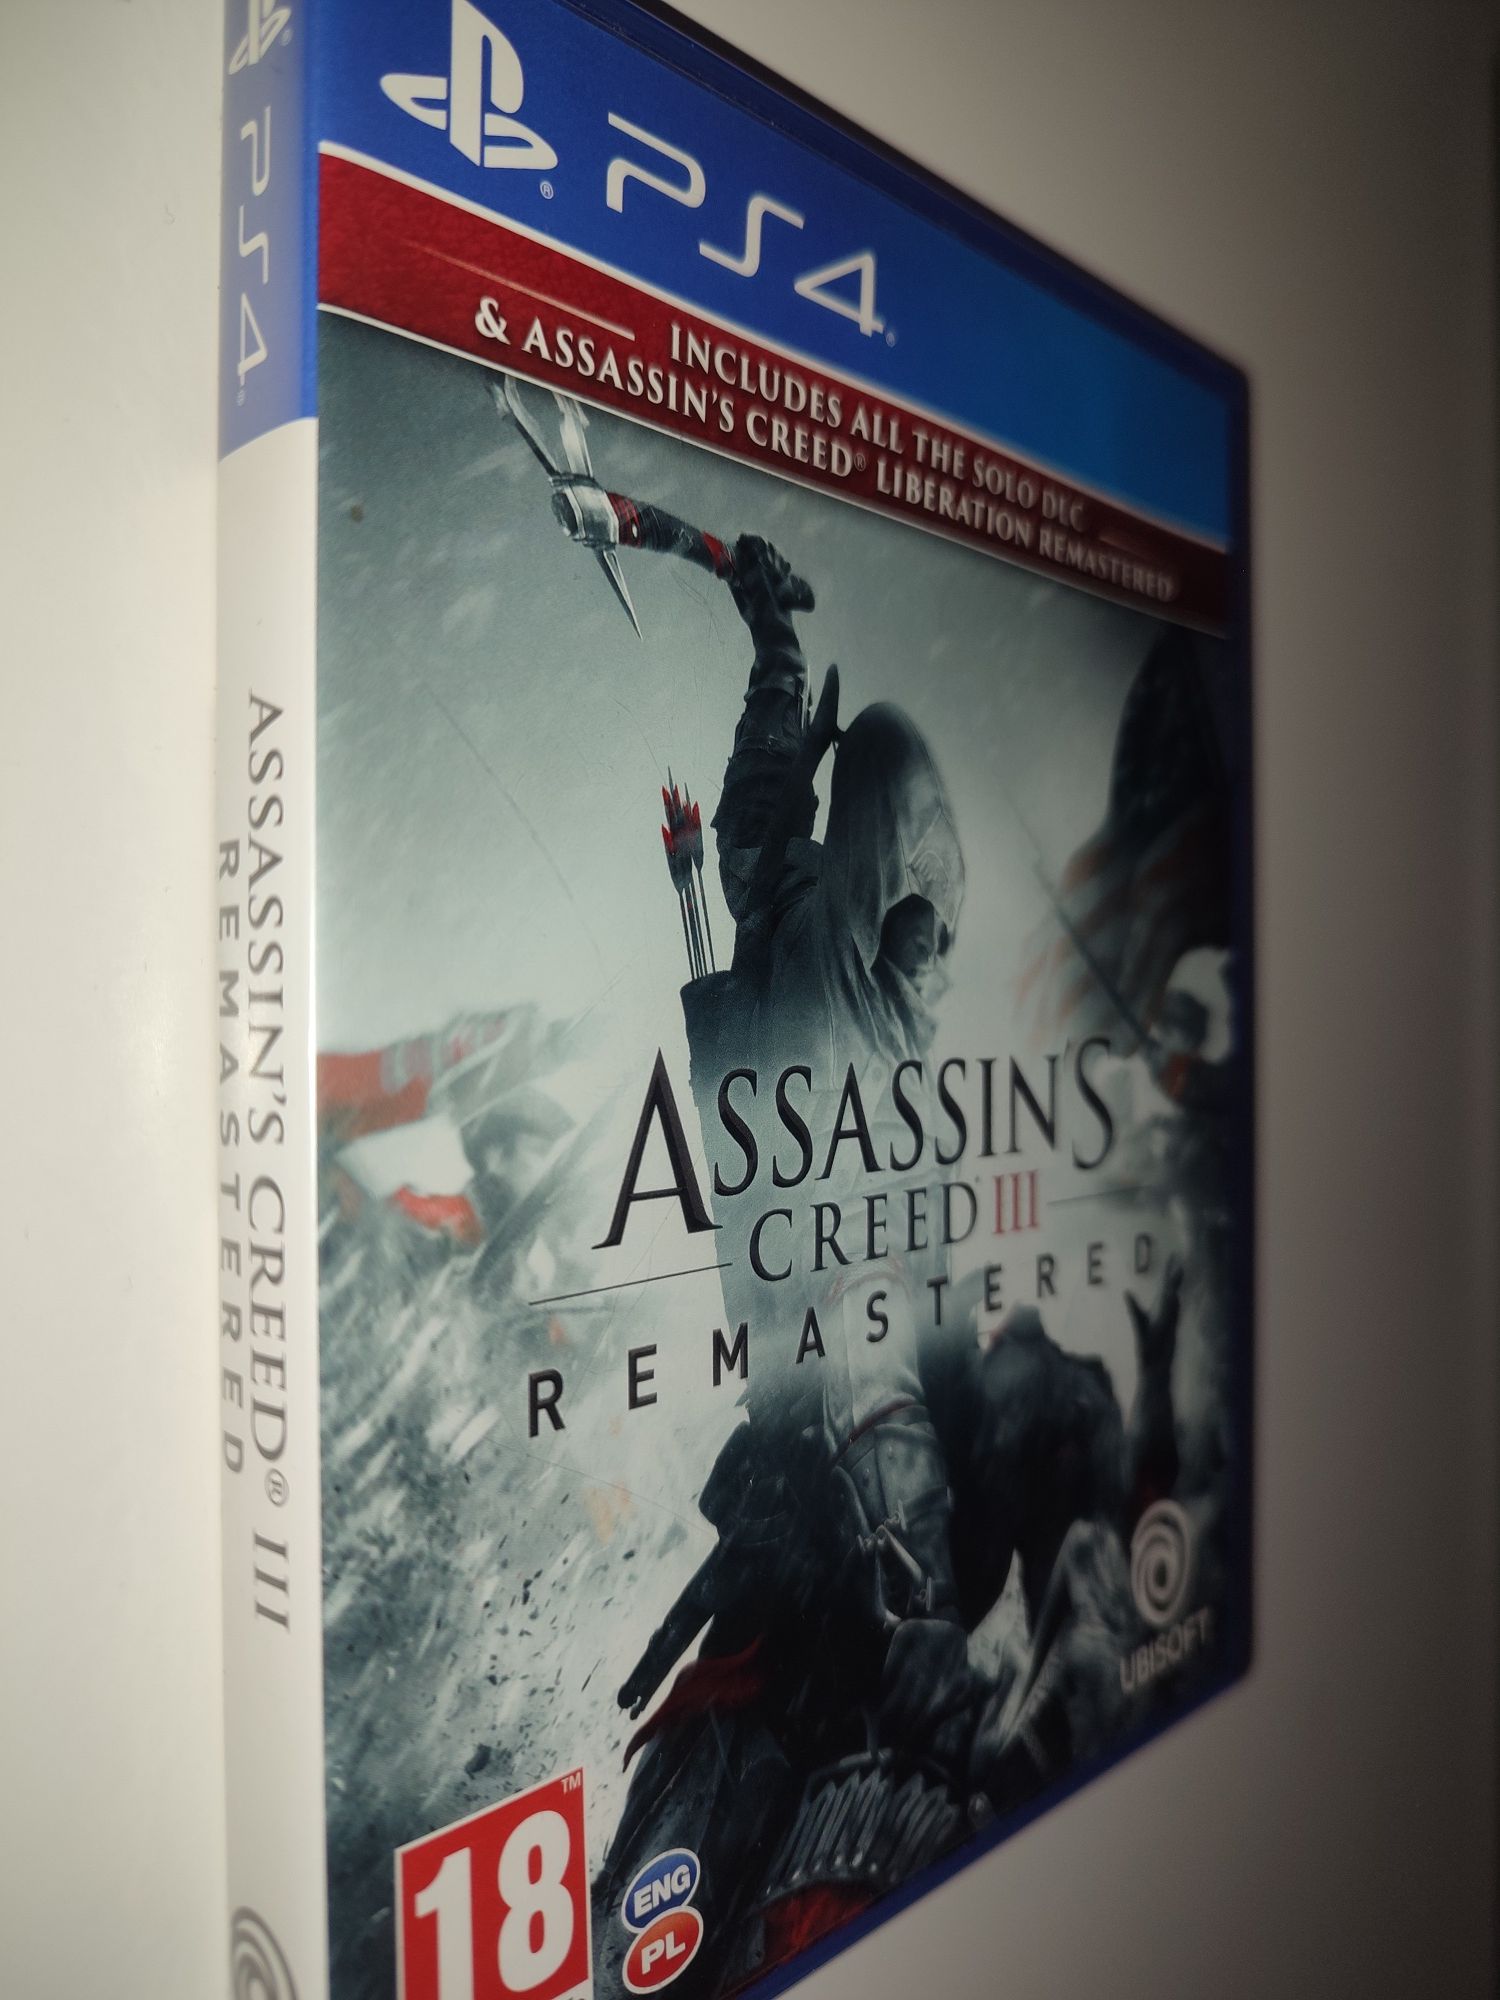 Gra Ps4 Assassins Creed III Remastered PL gry PlayStation 4 Uncharted